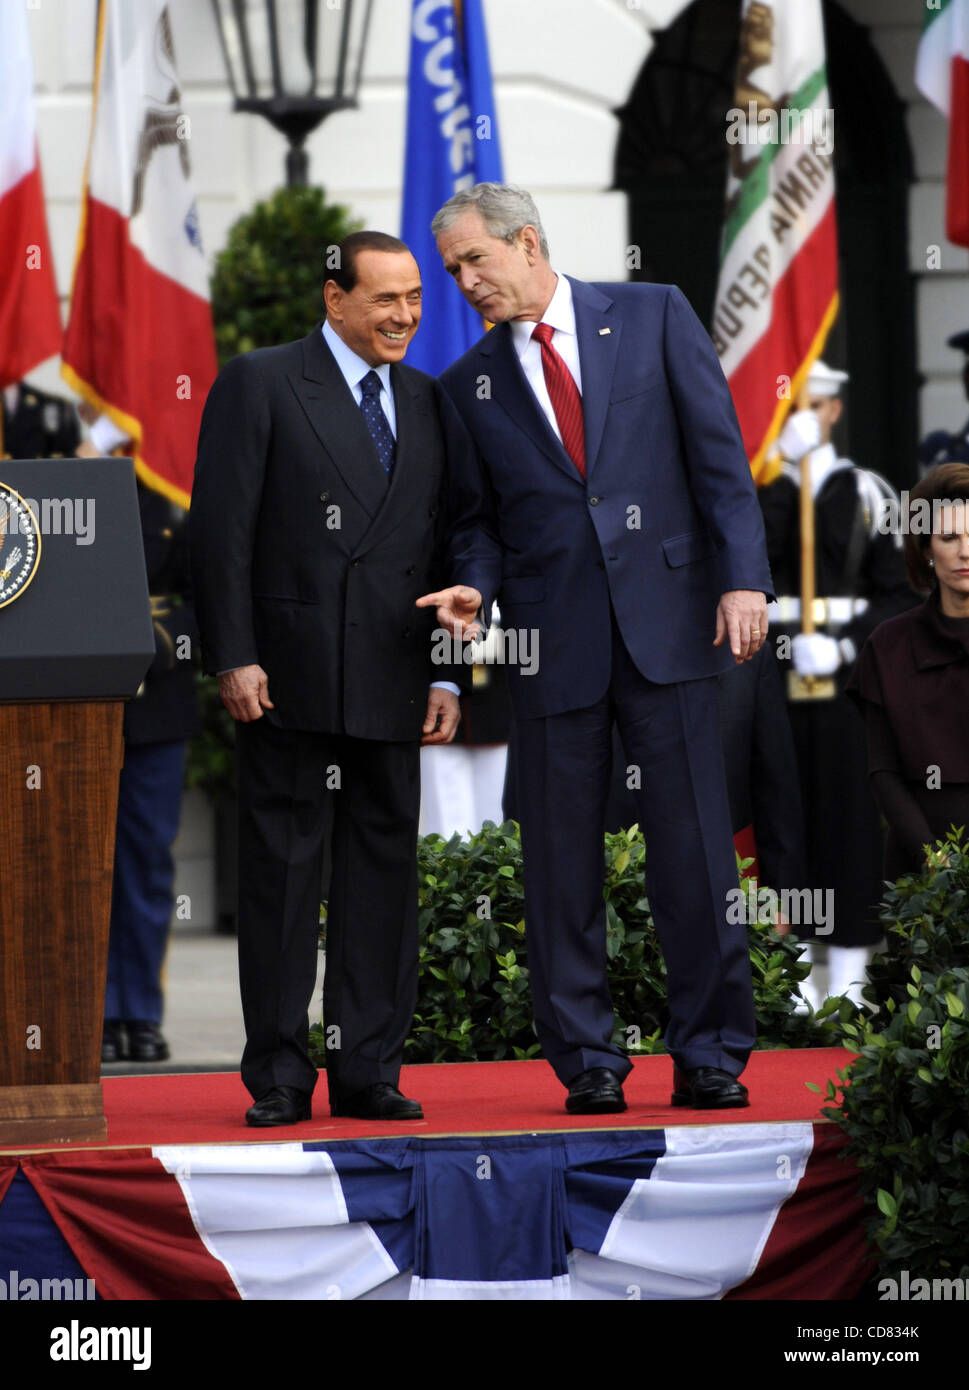 Apr. 17, 2008 - Washington, District of Columbia, U.S. - 10/13/08 - The White House- Washington, DC.President Bush welcomes Prime Minister Silvio Berlusconi of Italy to the White House for An Official State Arrival Ceremony..  - -   I13831CB(Credit Image: © Christy Bowe/Globe Photos/ZUMAPRESS.com) Stock Photo